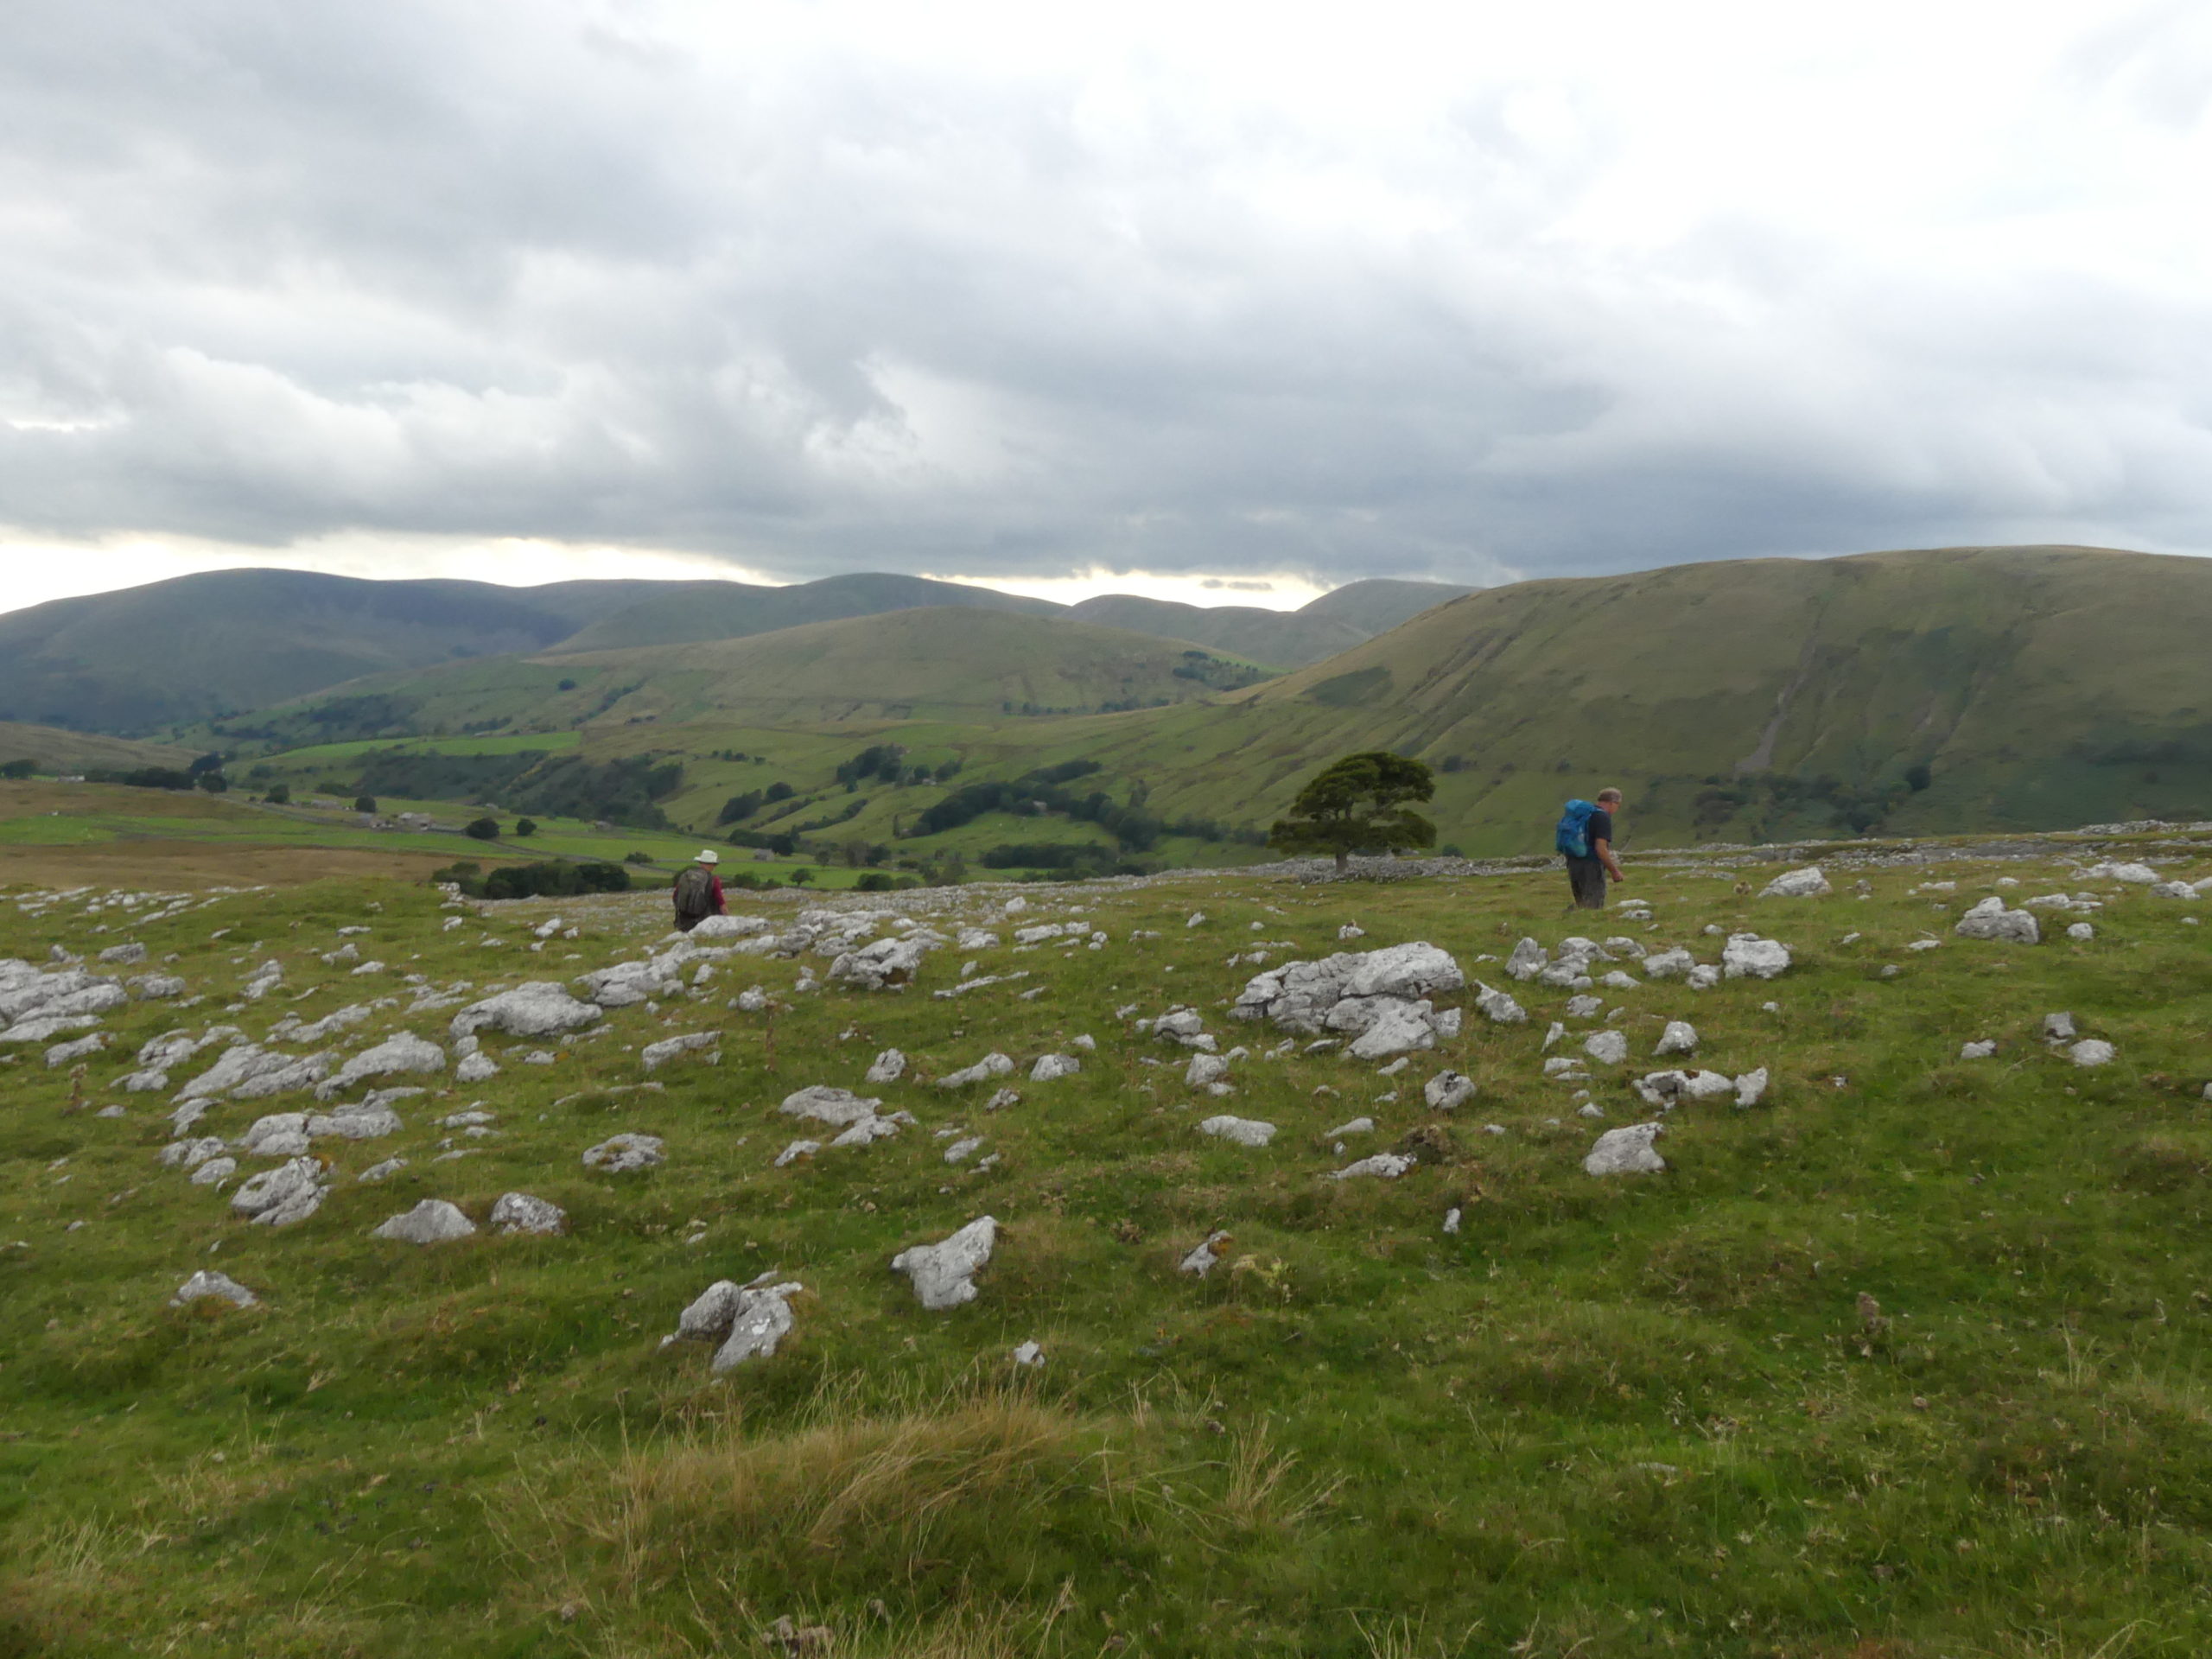 Fell End Clouds, looking towards the Howgills